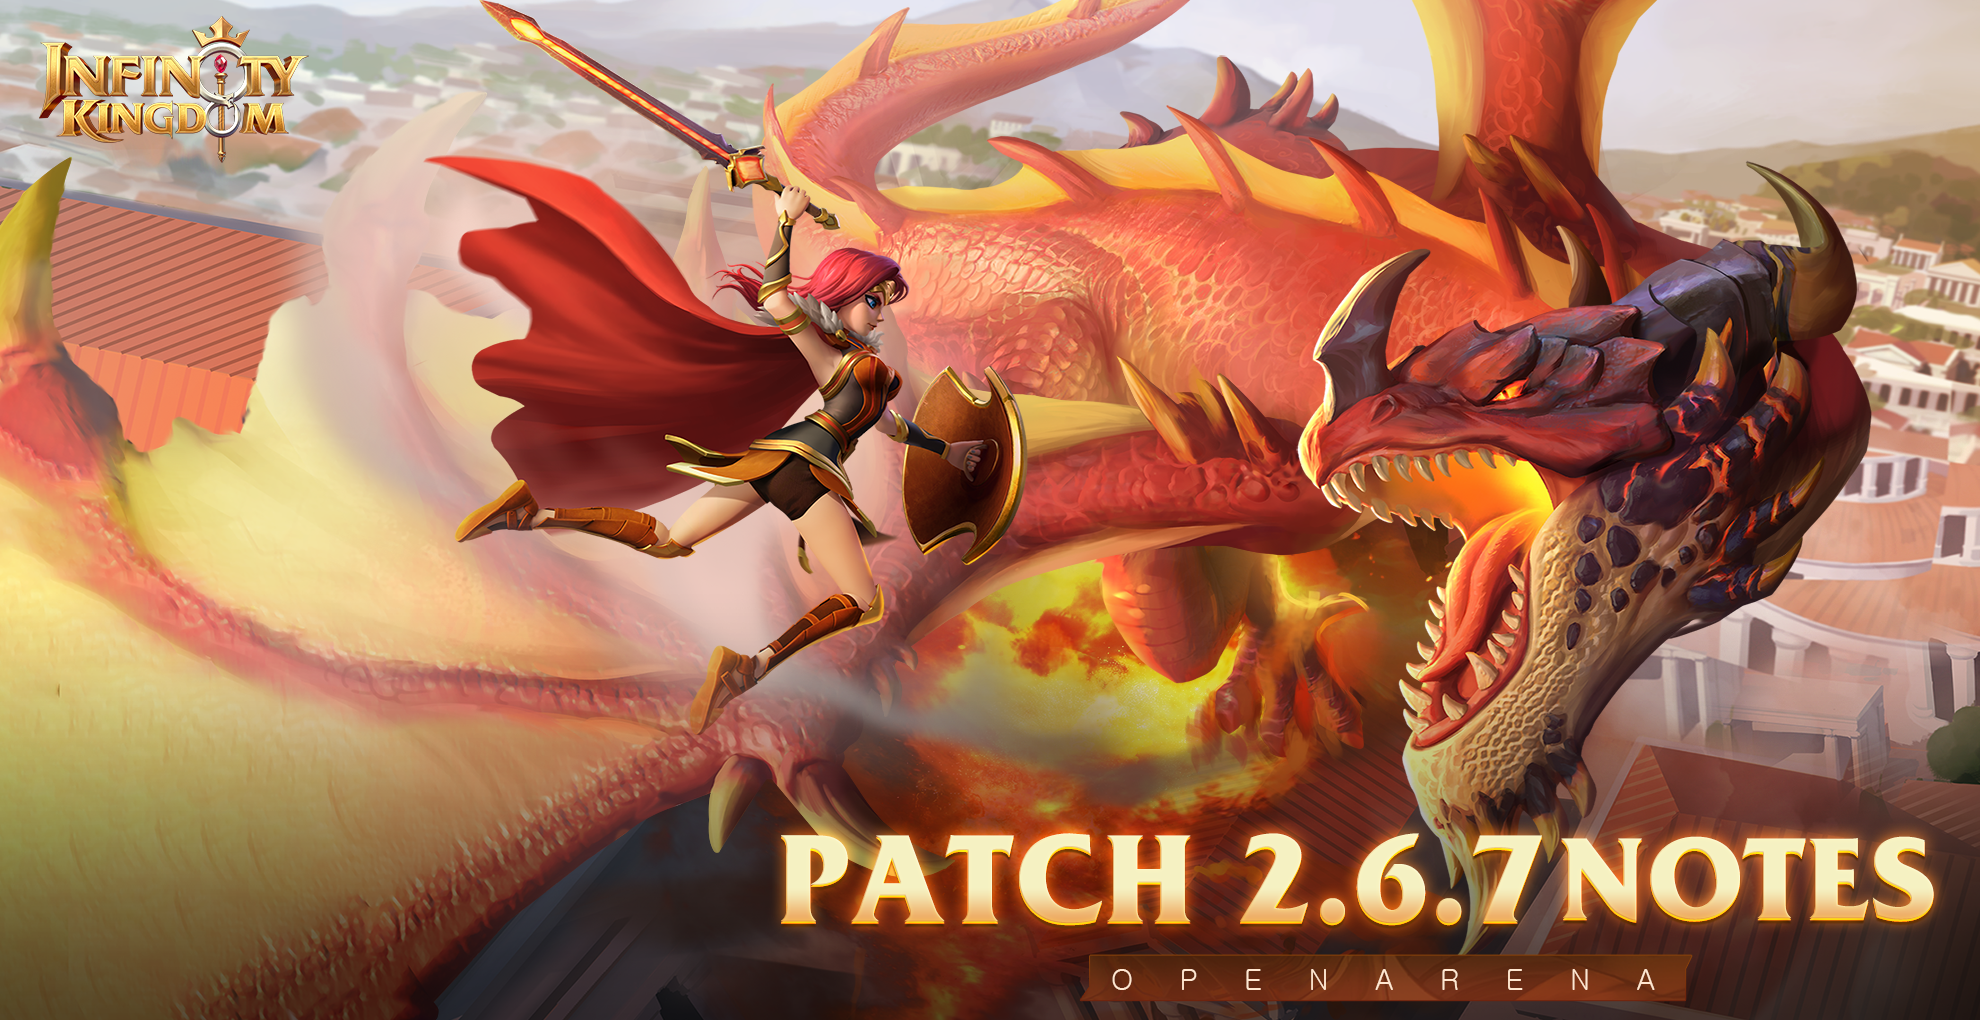 Patch 2.6.7 Notes